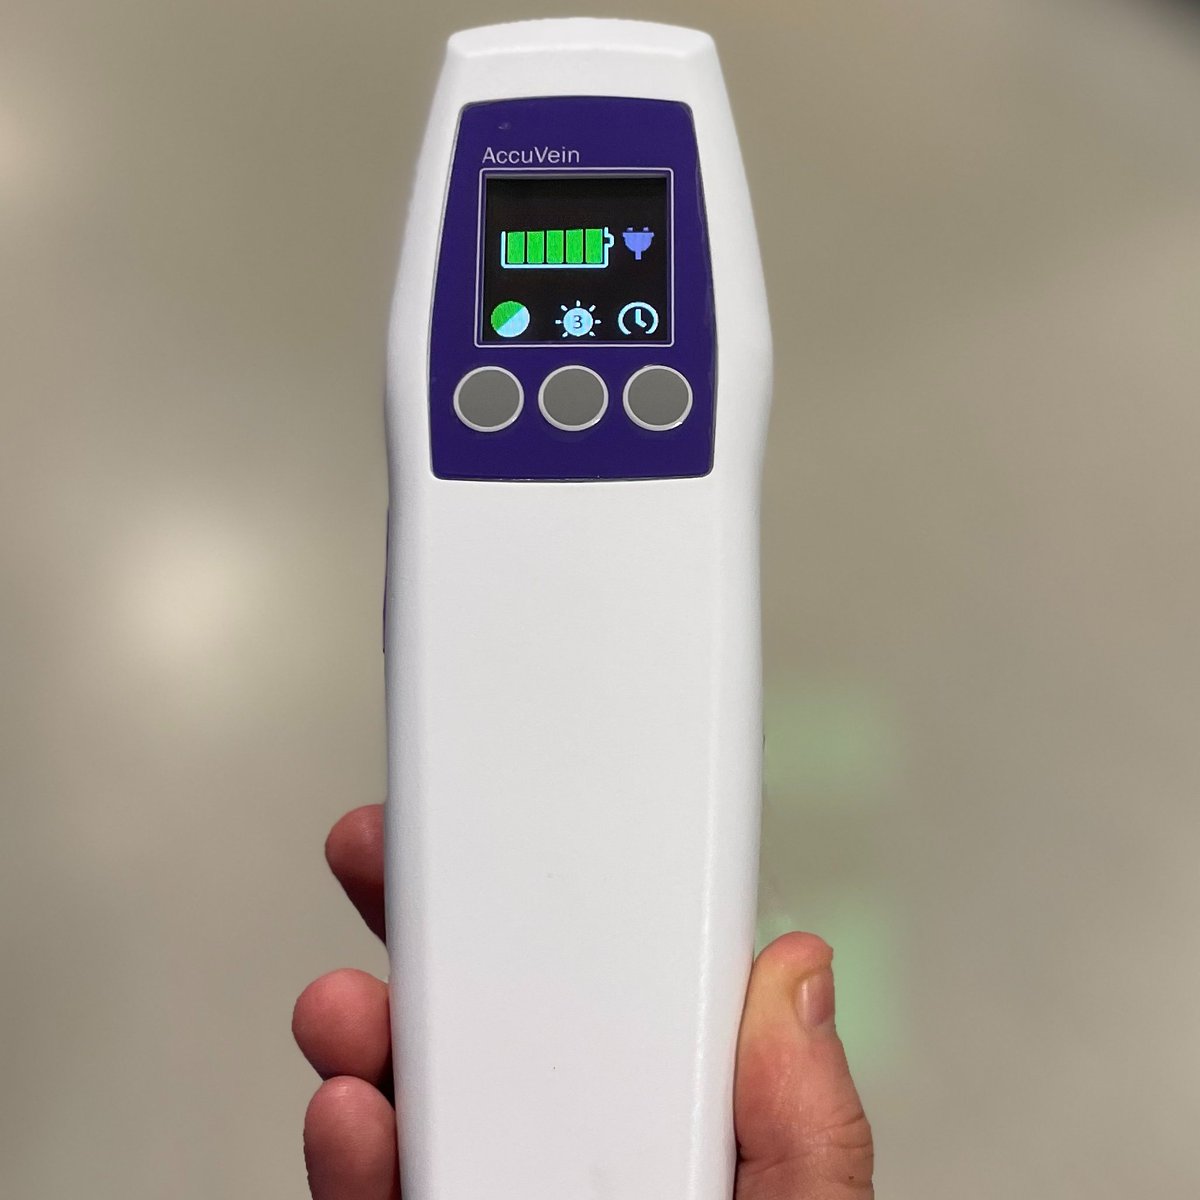 📷Thanks to your donations, we have purchased an Accuvein scanner for @nnuhjlch - a non-invasive, portable and easy-to-use device to assess veins which helps reduce distress and needle phobia in children.